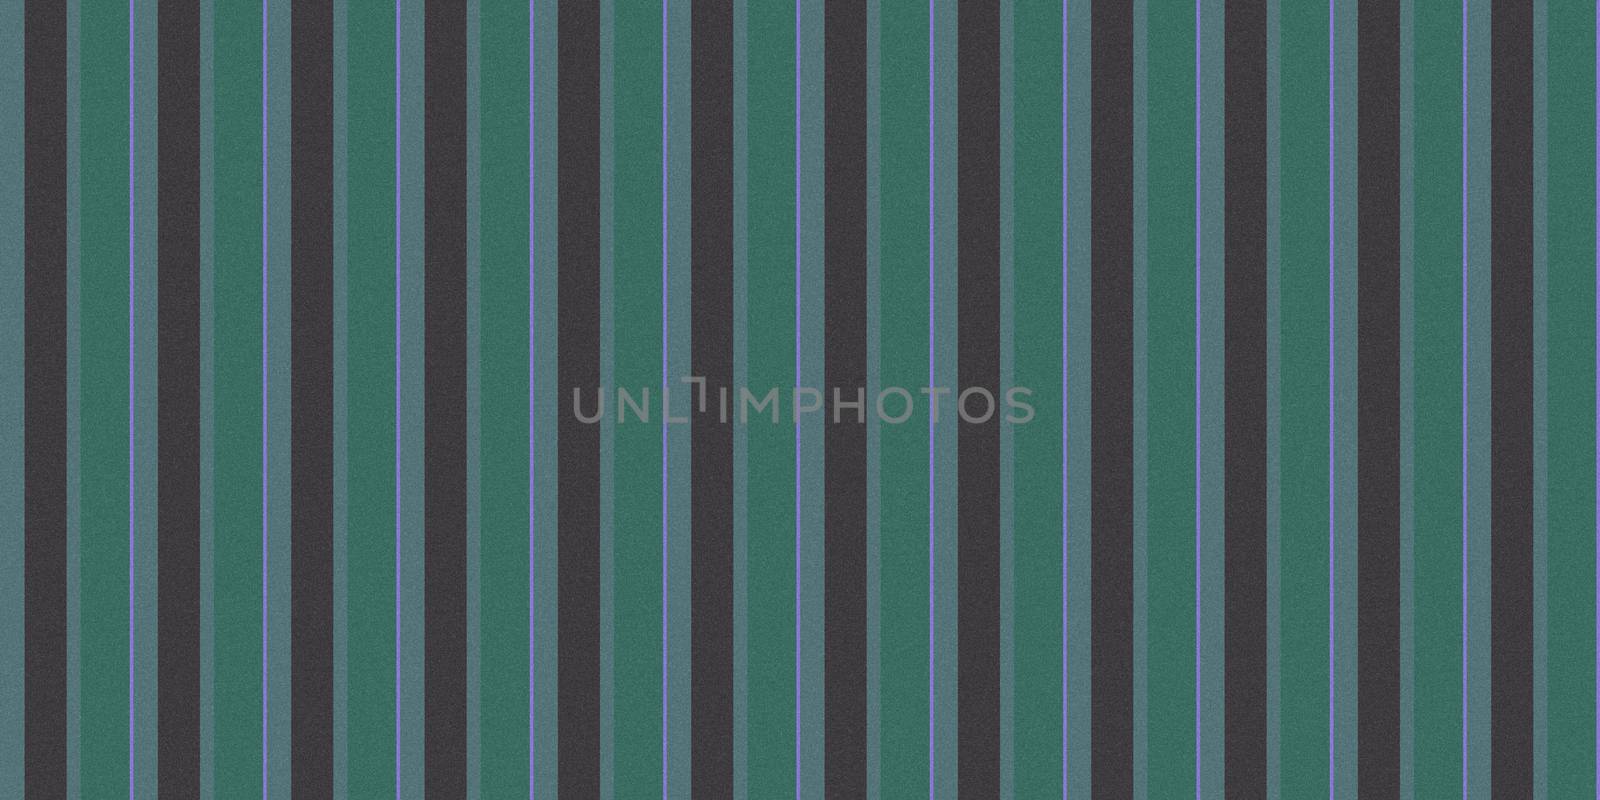 Dark Turquoise Gray Seamless Striped Lines Background Texture. Modern Vintage Style Pattern.